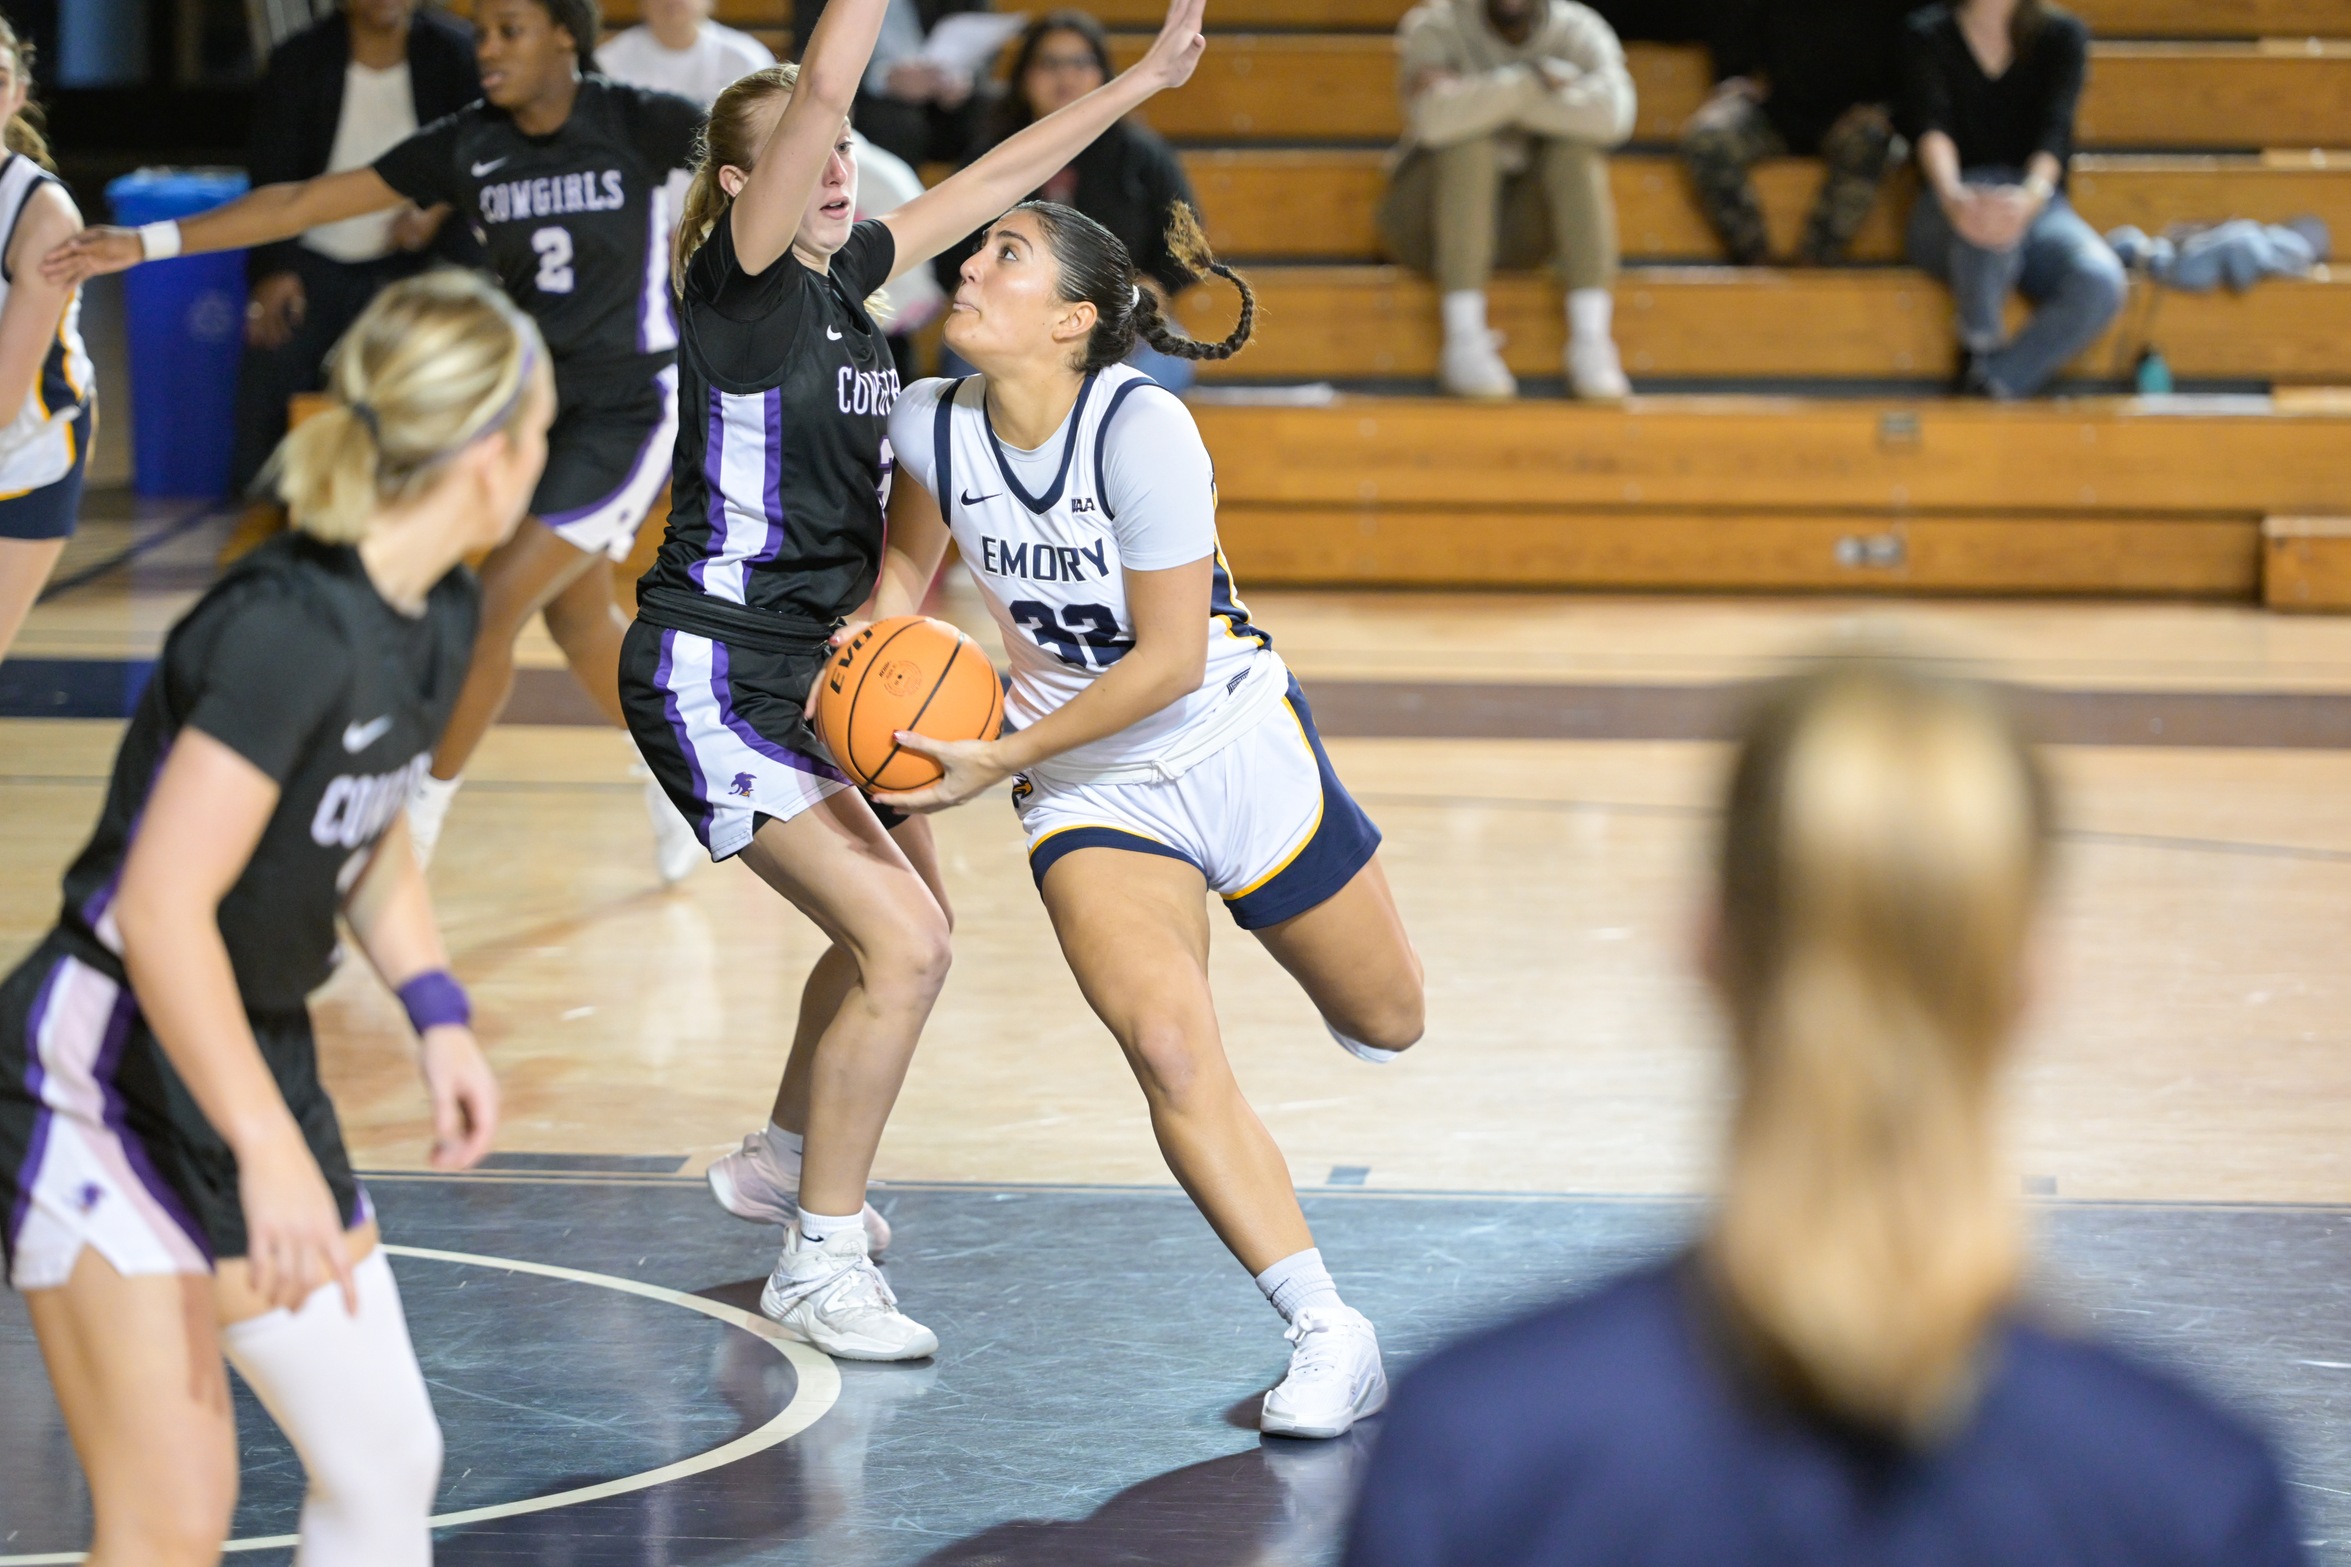 Women’s Basketball Completes Comeback Win over Case Western Reserve, 61-55